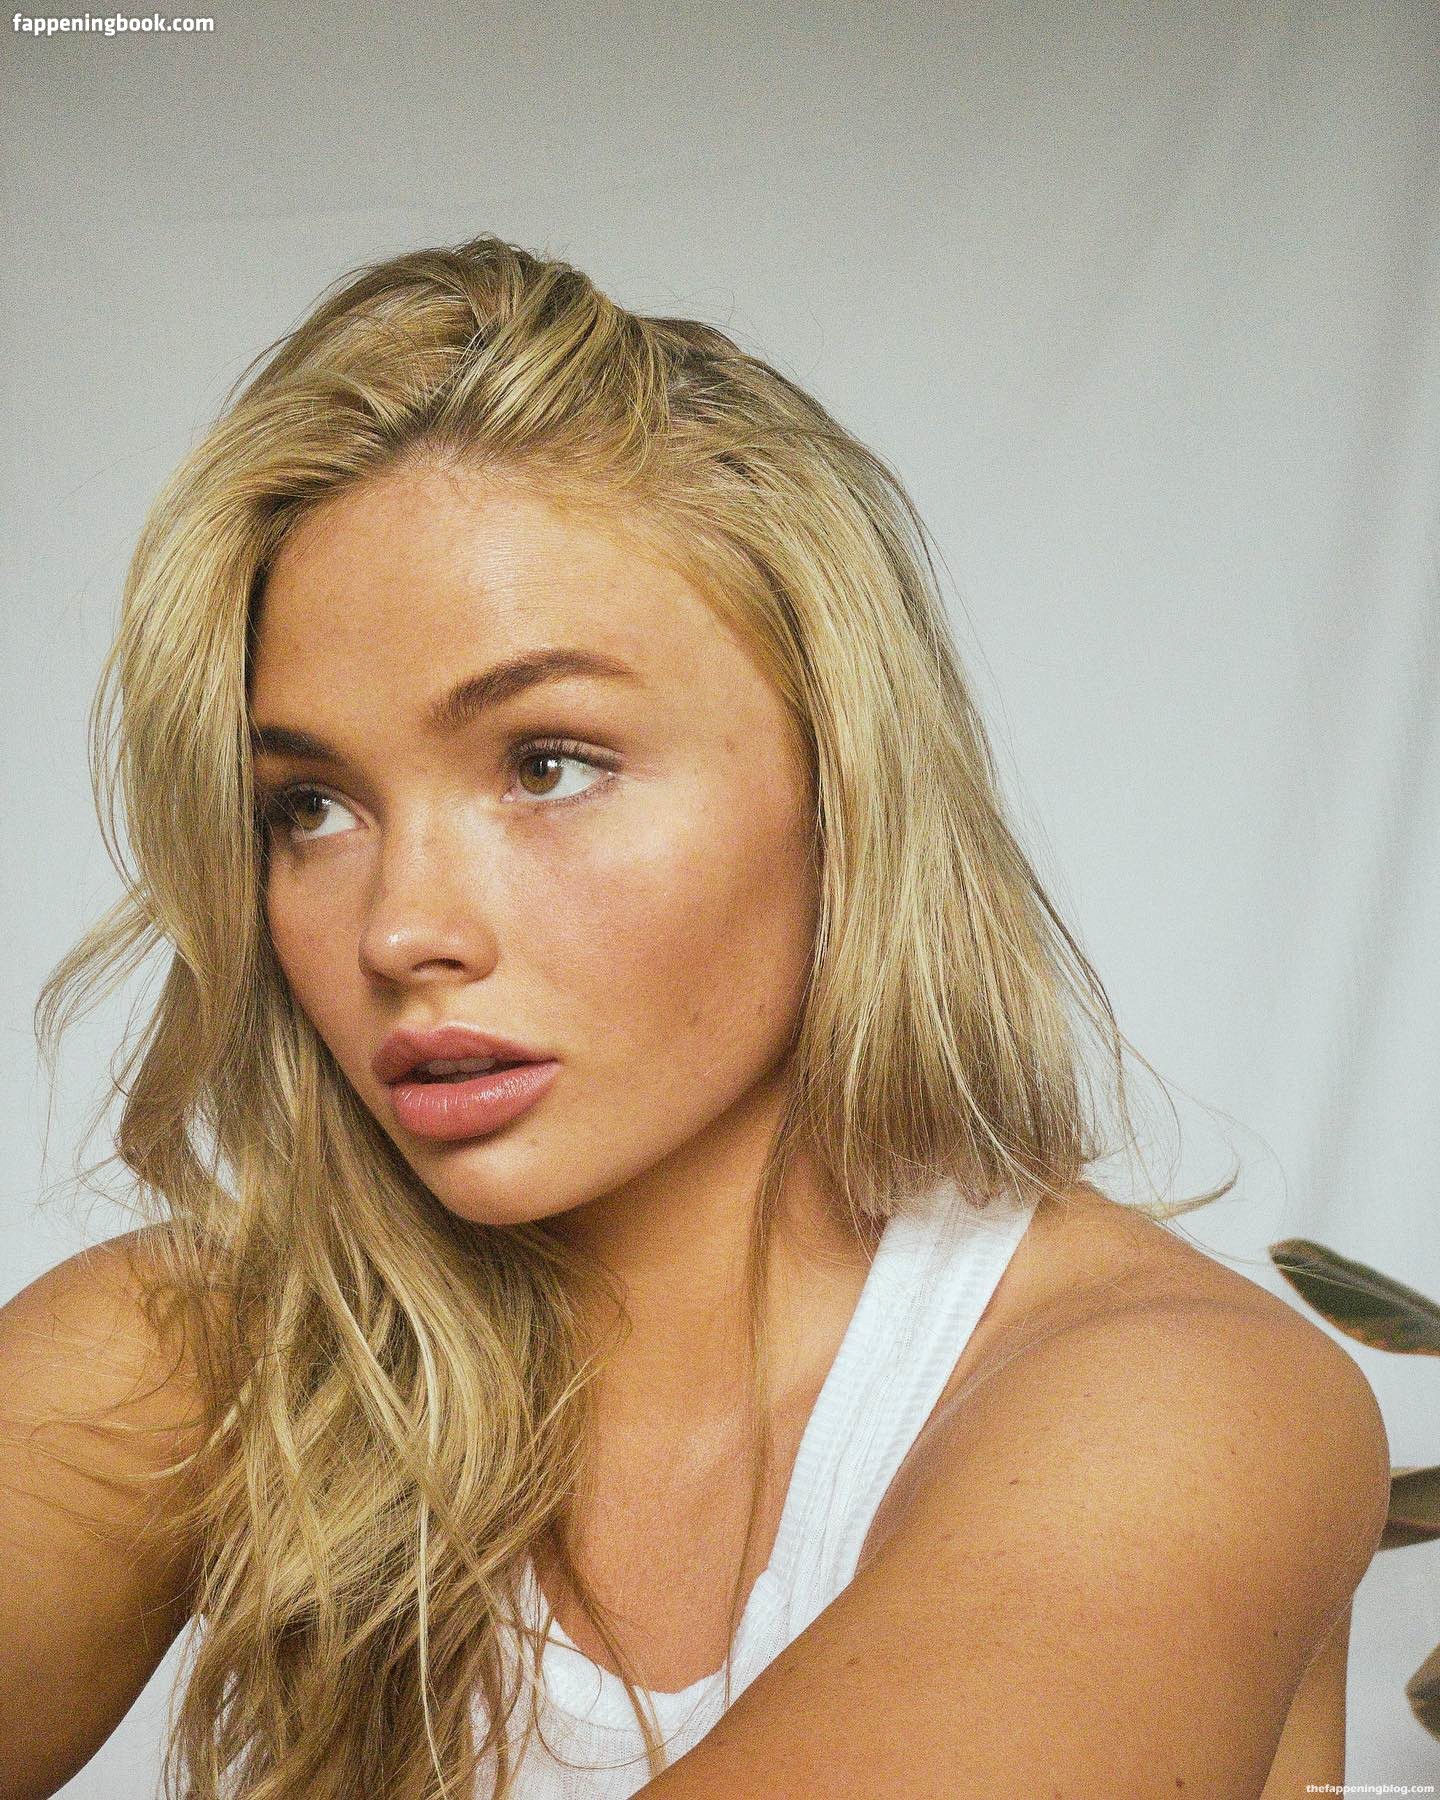 Natalie Alyn Lind Nude, The Fappening - Photo #1405581 - FappeningBook